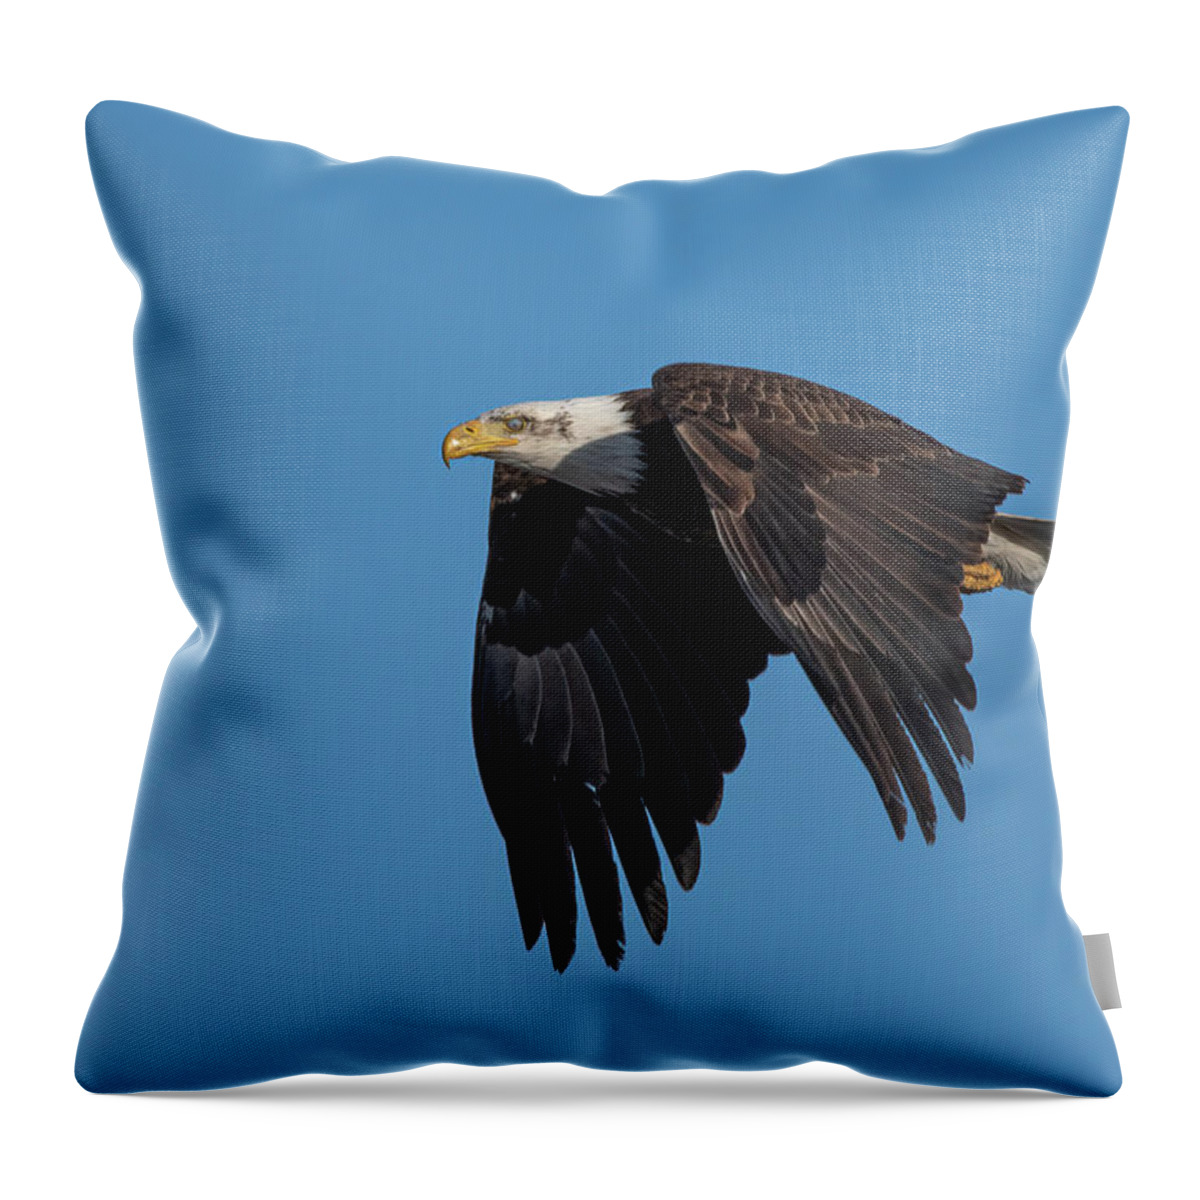 Raptor Throw Pillow featuring the photograph American Bald Eagle 1 by Rick Mosher